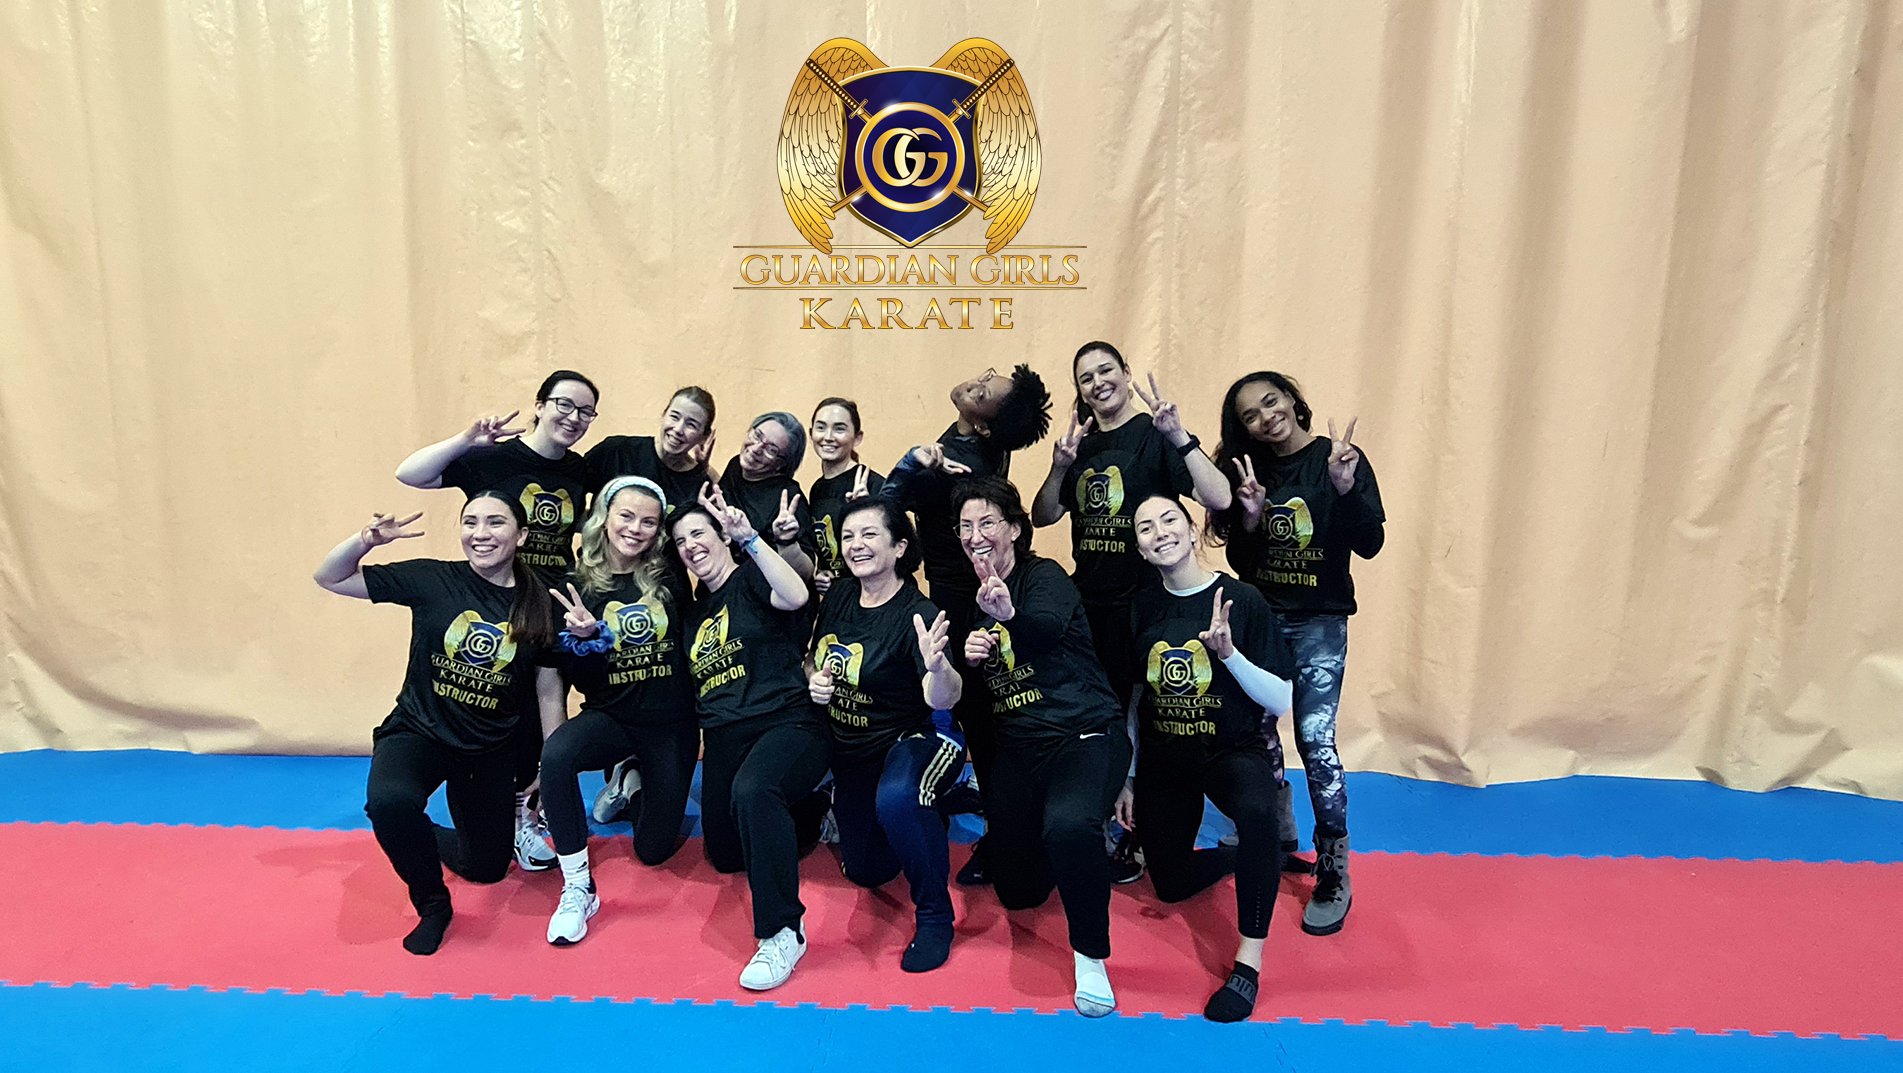 New stage of Guardian Girls Karate Project launched with successful Instructors Course in Madrid